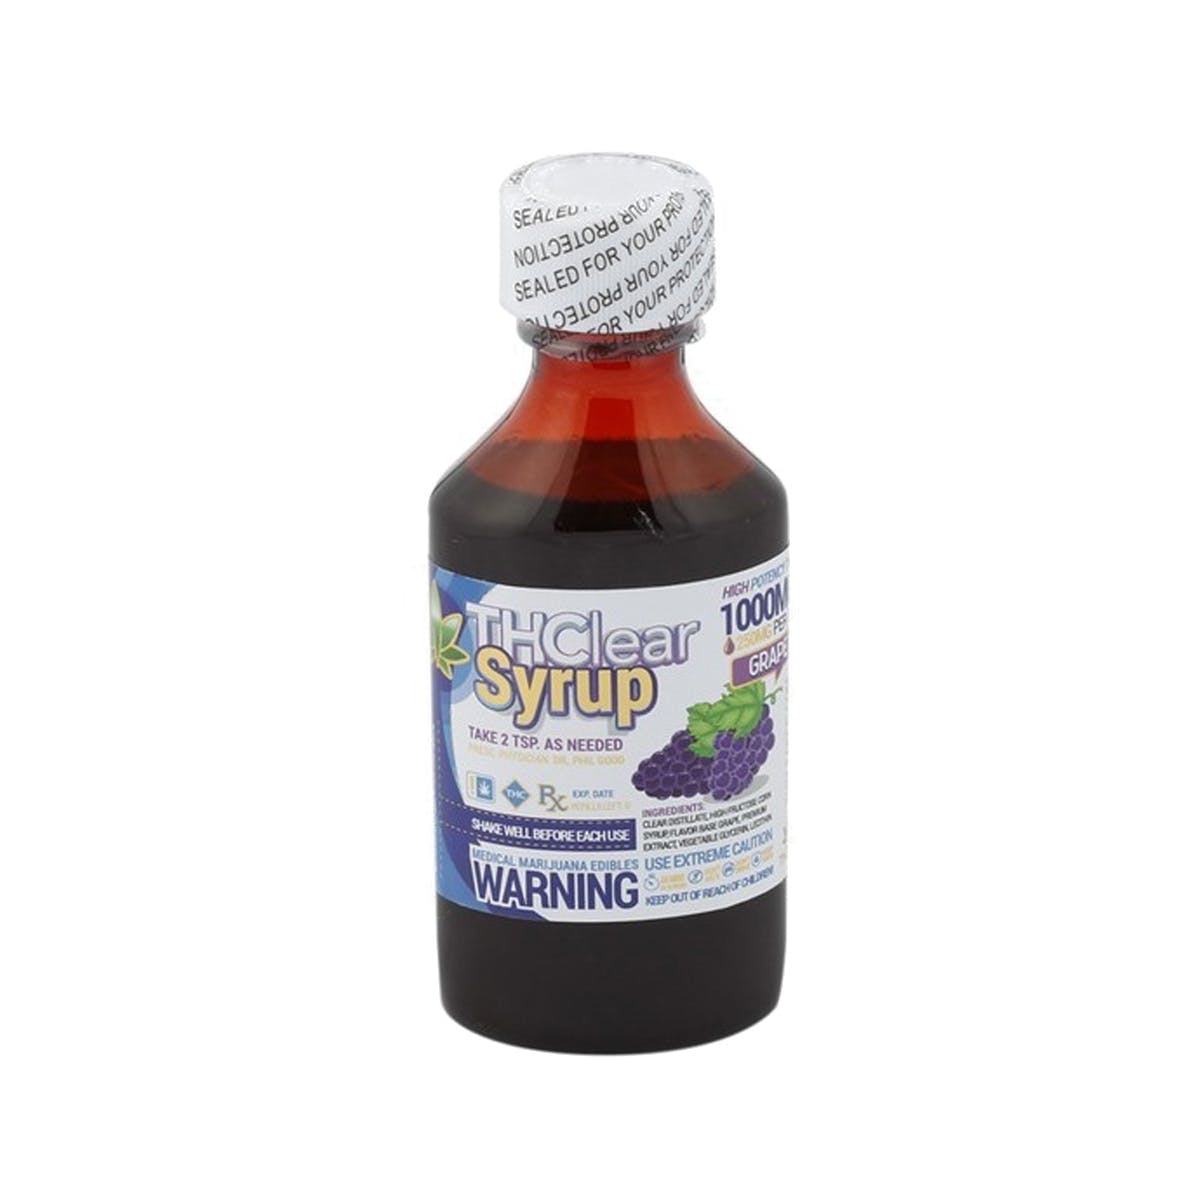 marijuana-dispensaries-mr-steal-your-patients-2419-cap-in-whittier-grape-syrup-1000mg